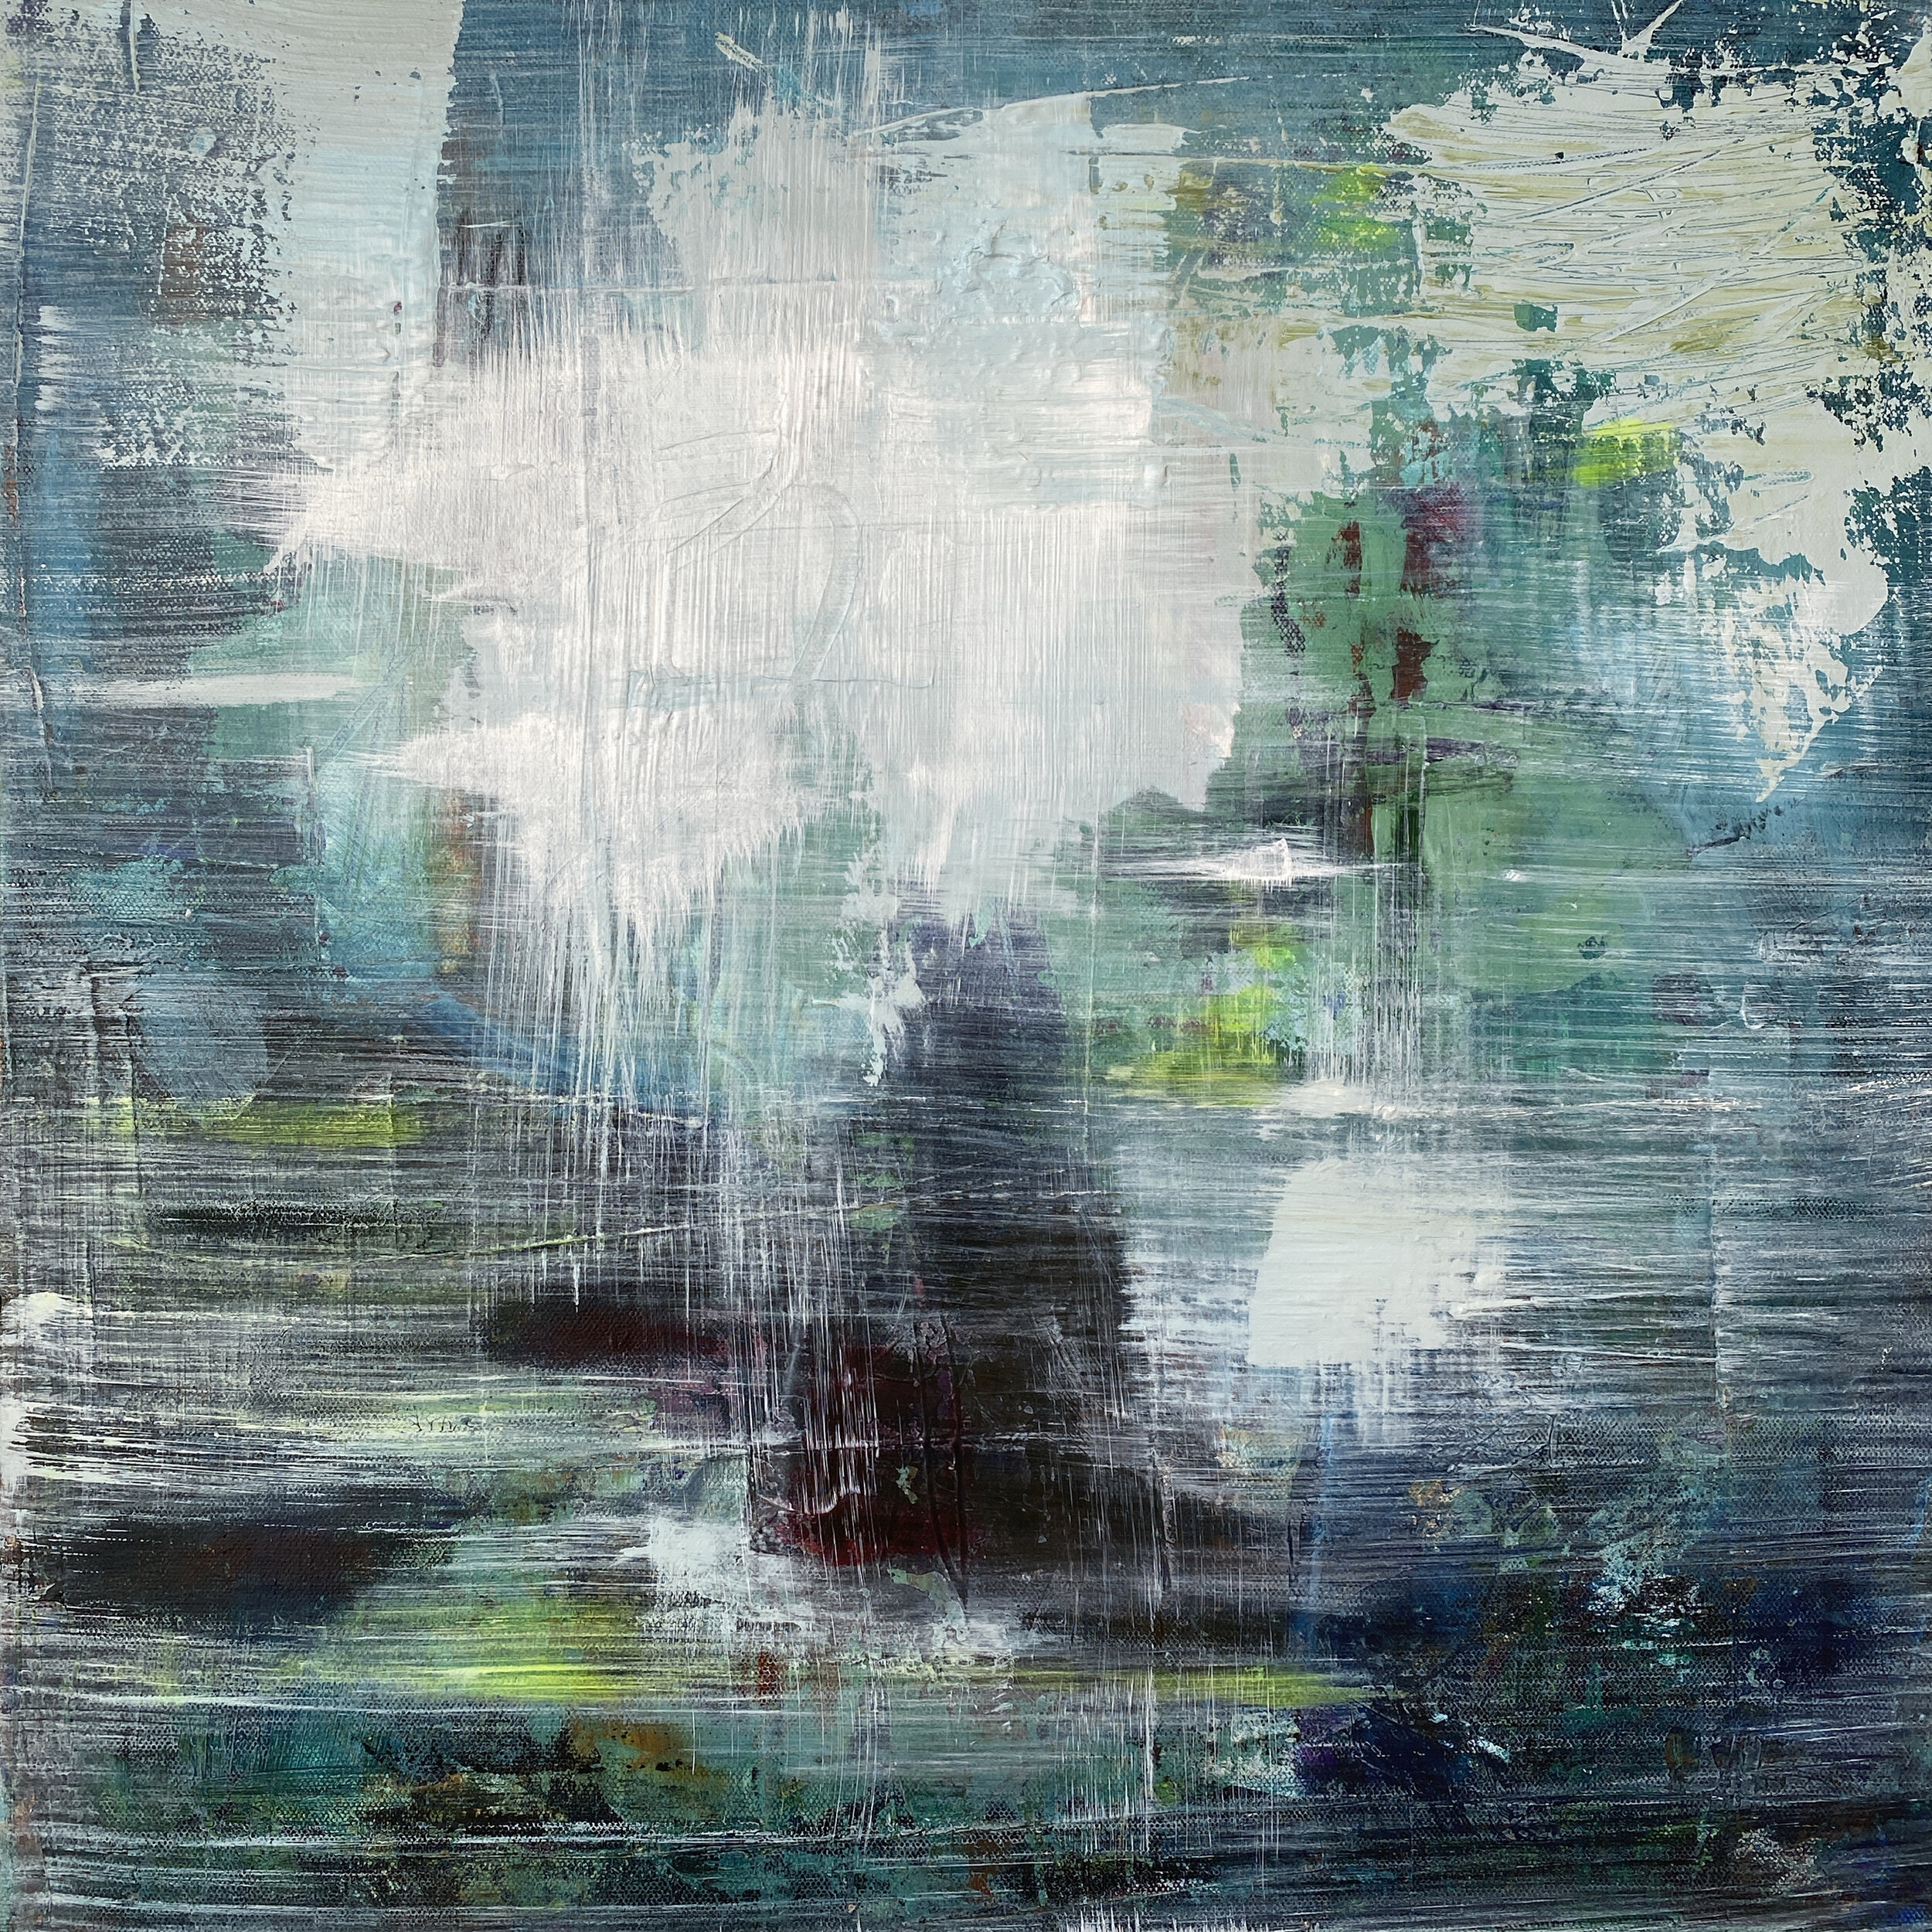   Translation of "Nocturne Op.9 No.2" (F. Chopin) , mixed media on canvas, 20 x 20 inches 